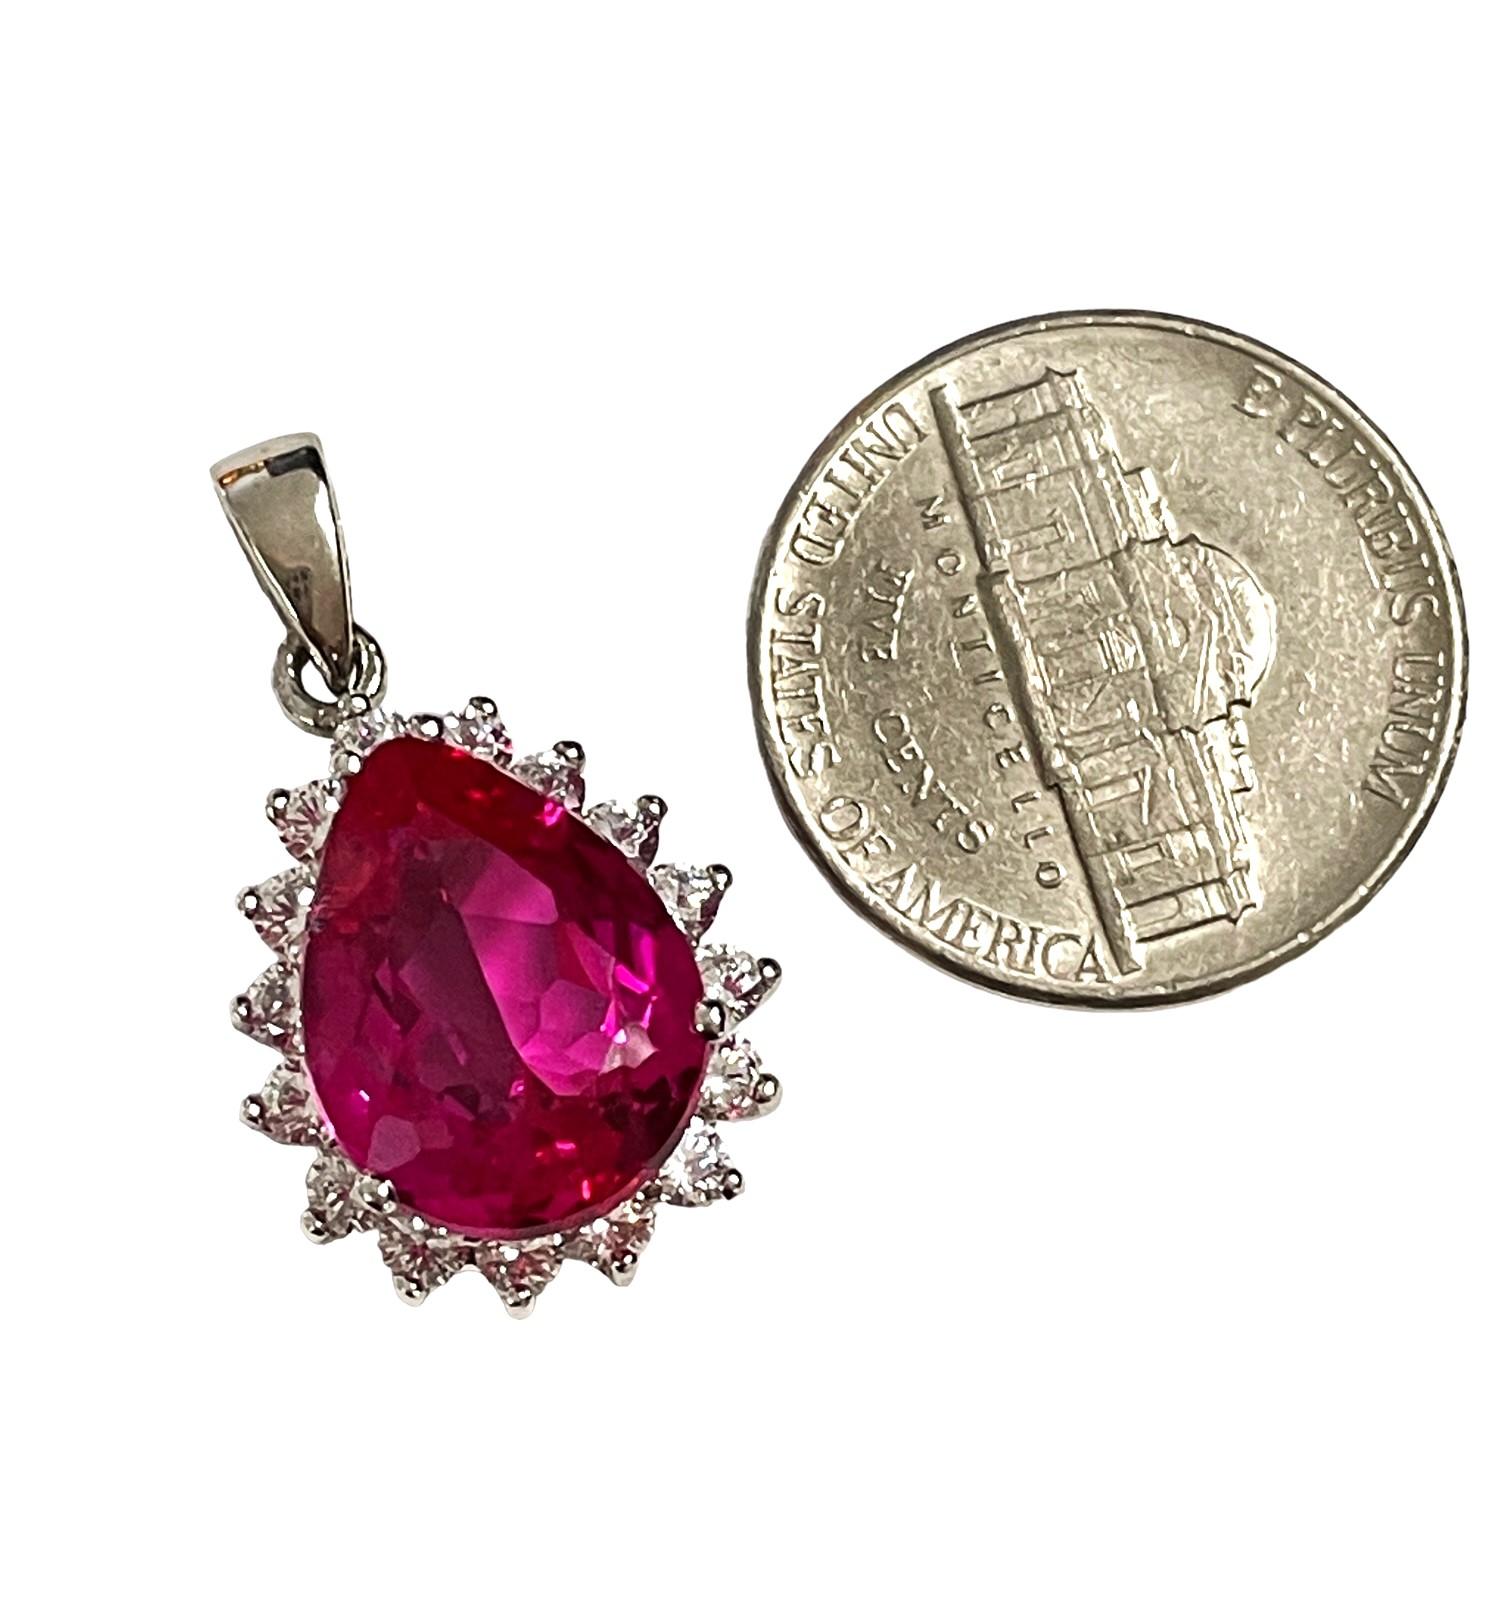 New African 8.7 Carat Raspberry Topaz and White Sapphire Sterling Pendant For Sale 3